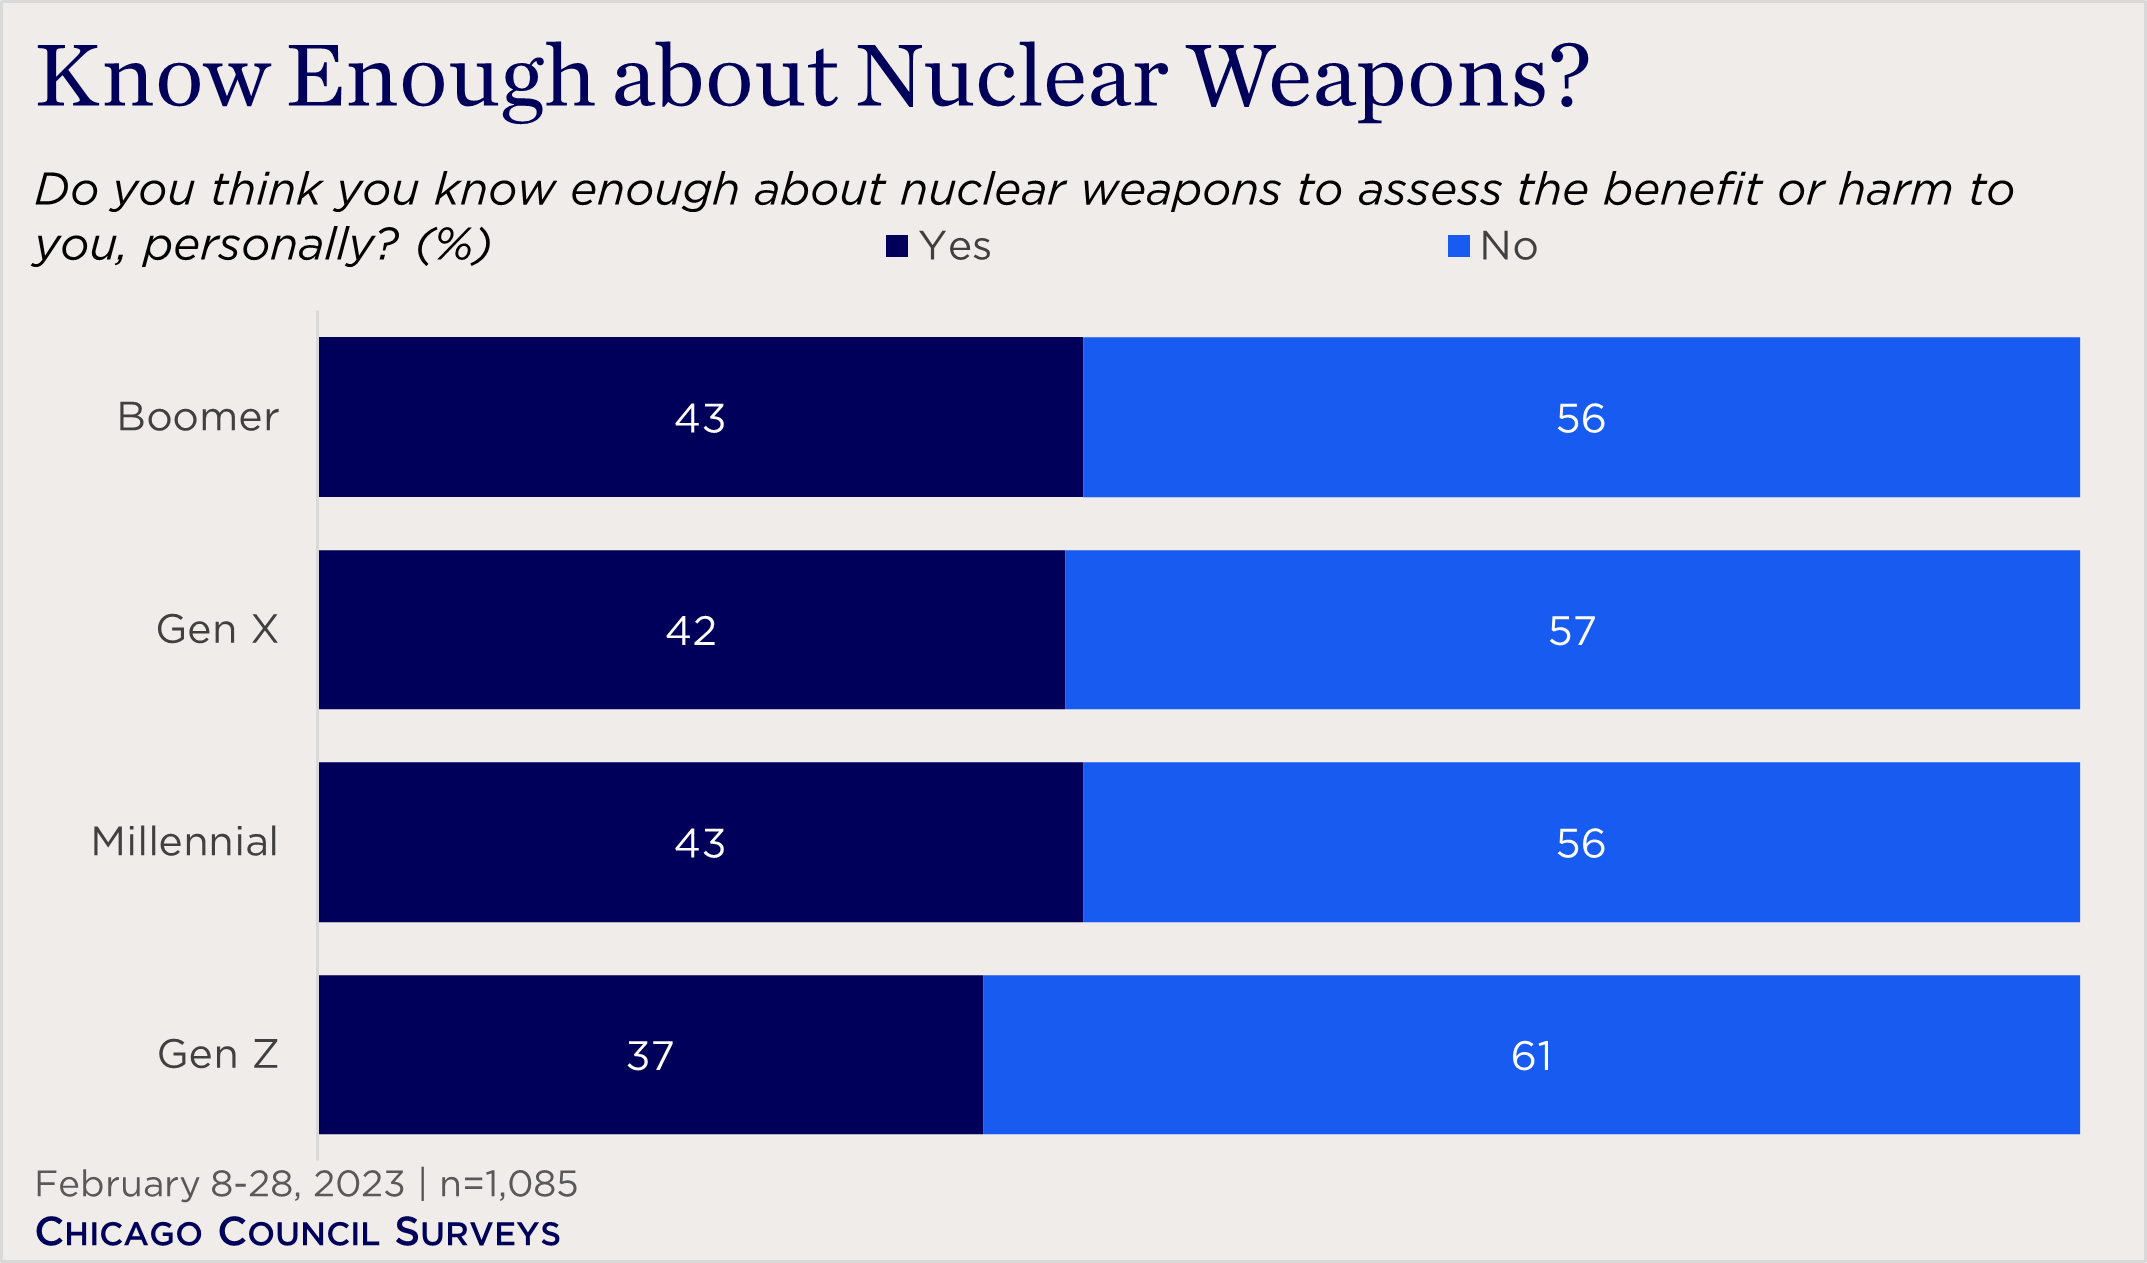 "bar chart showing generational views on nuclear knowledge"